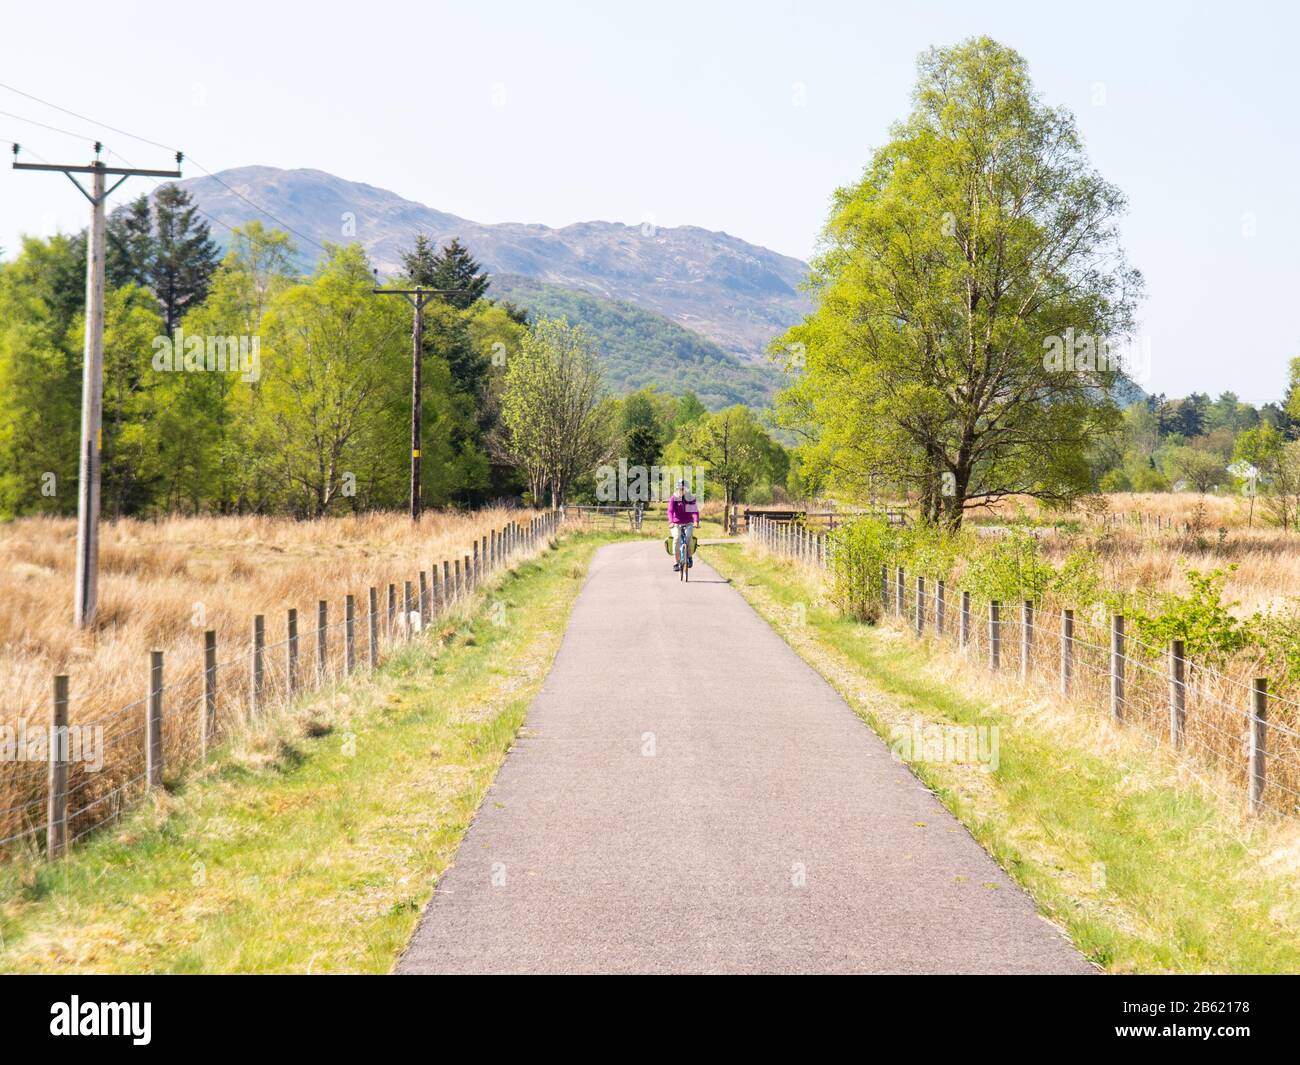 Oban, Scotland, UK - May 12, 2016: A touring cyclist rides through countryside in Appin in the Scottish Highlands on the Caledonia Way, part of the Na Stock Photo